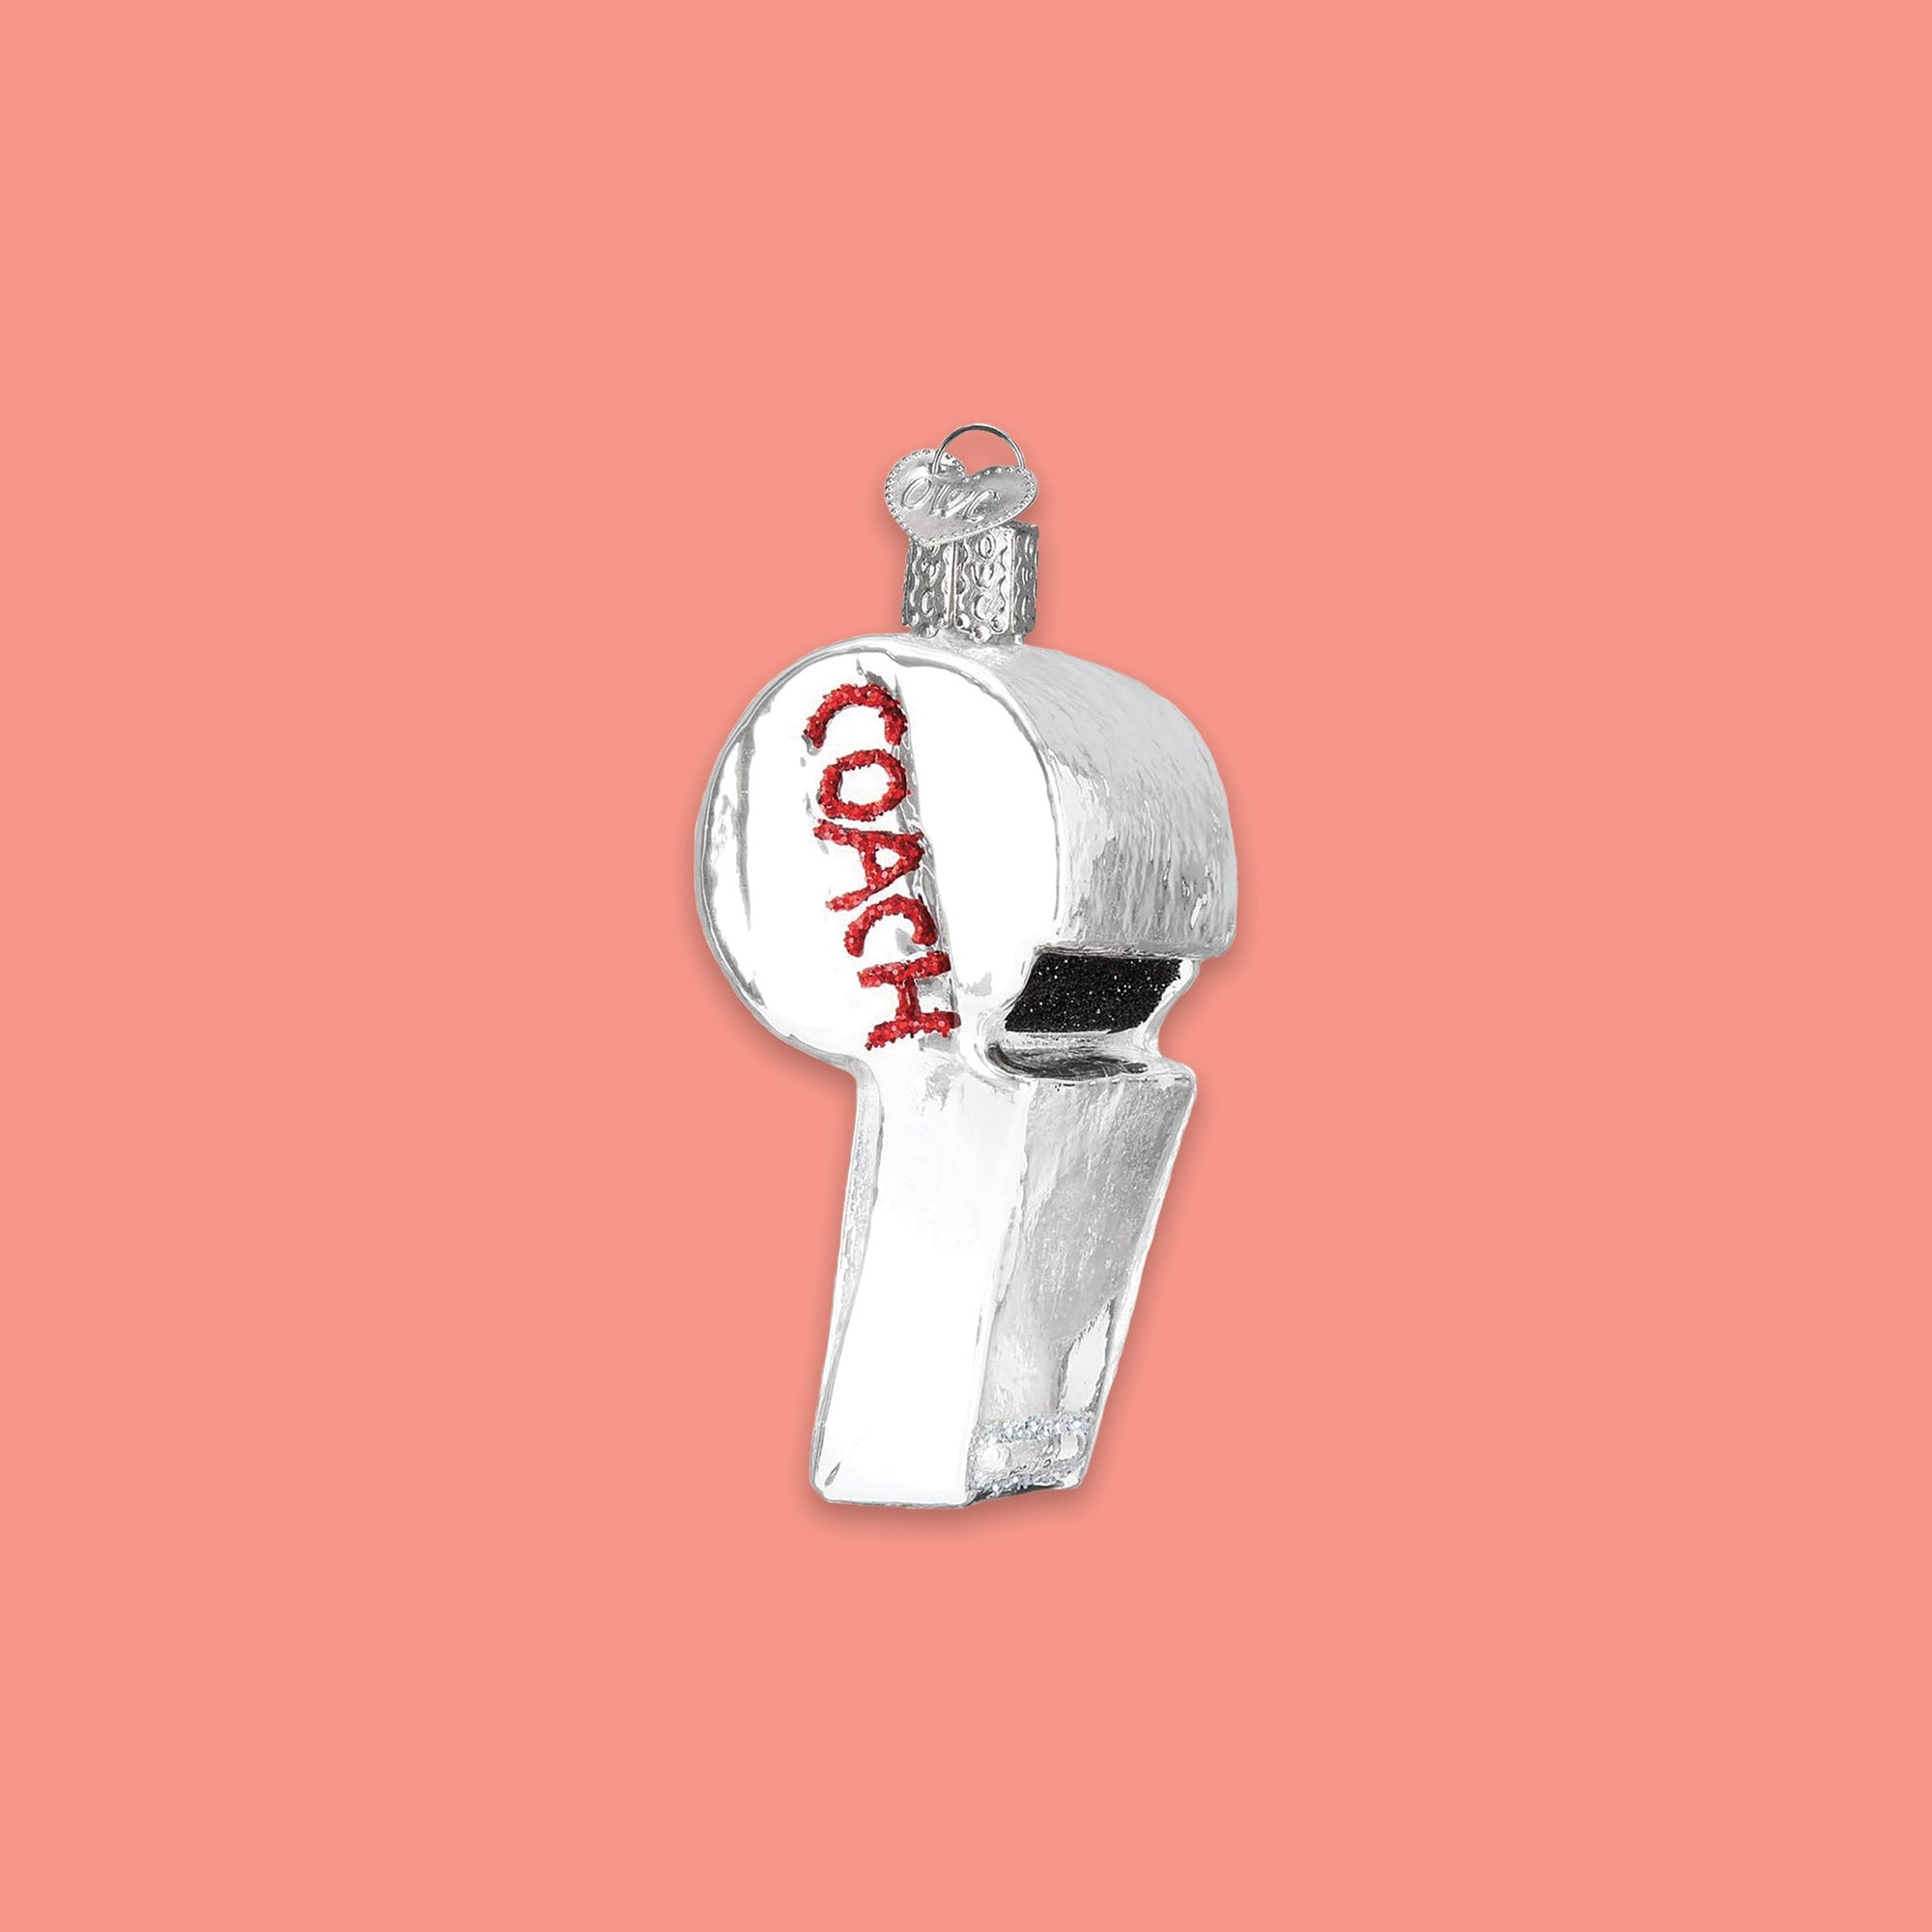 On a coral pinkbackground sits a whistle ornament. This silver glass ornament looks like a real whistle and in red glitter it says "COACH." 